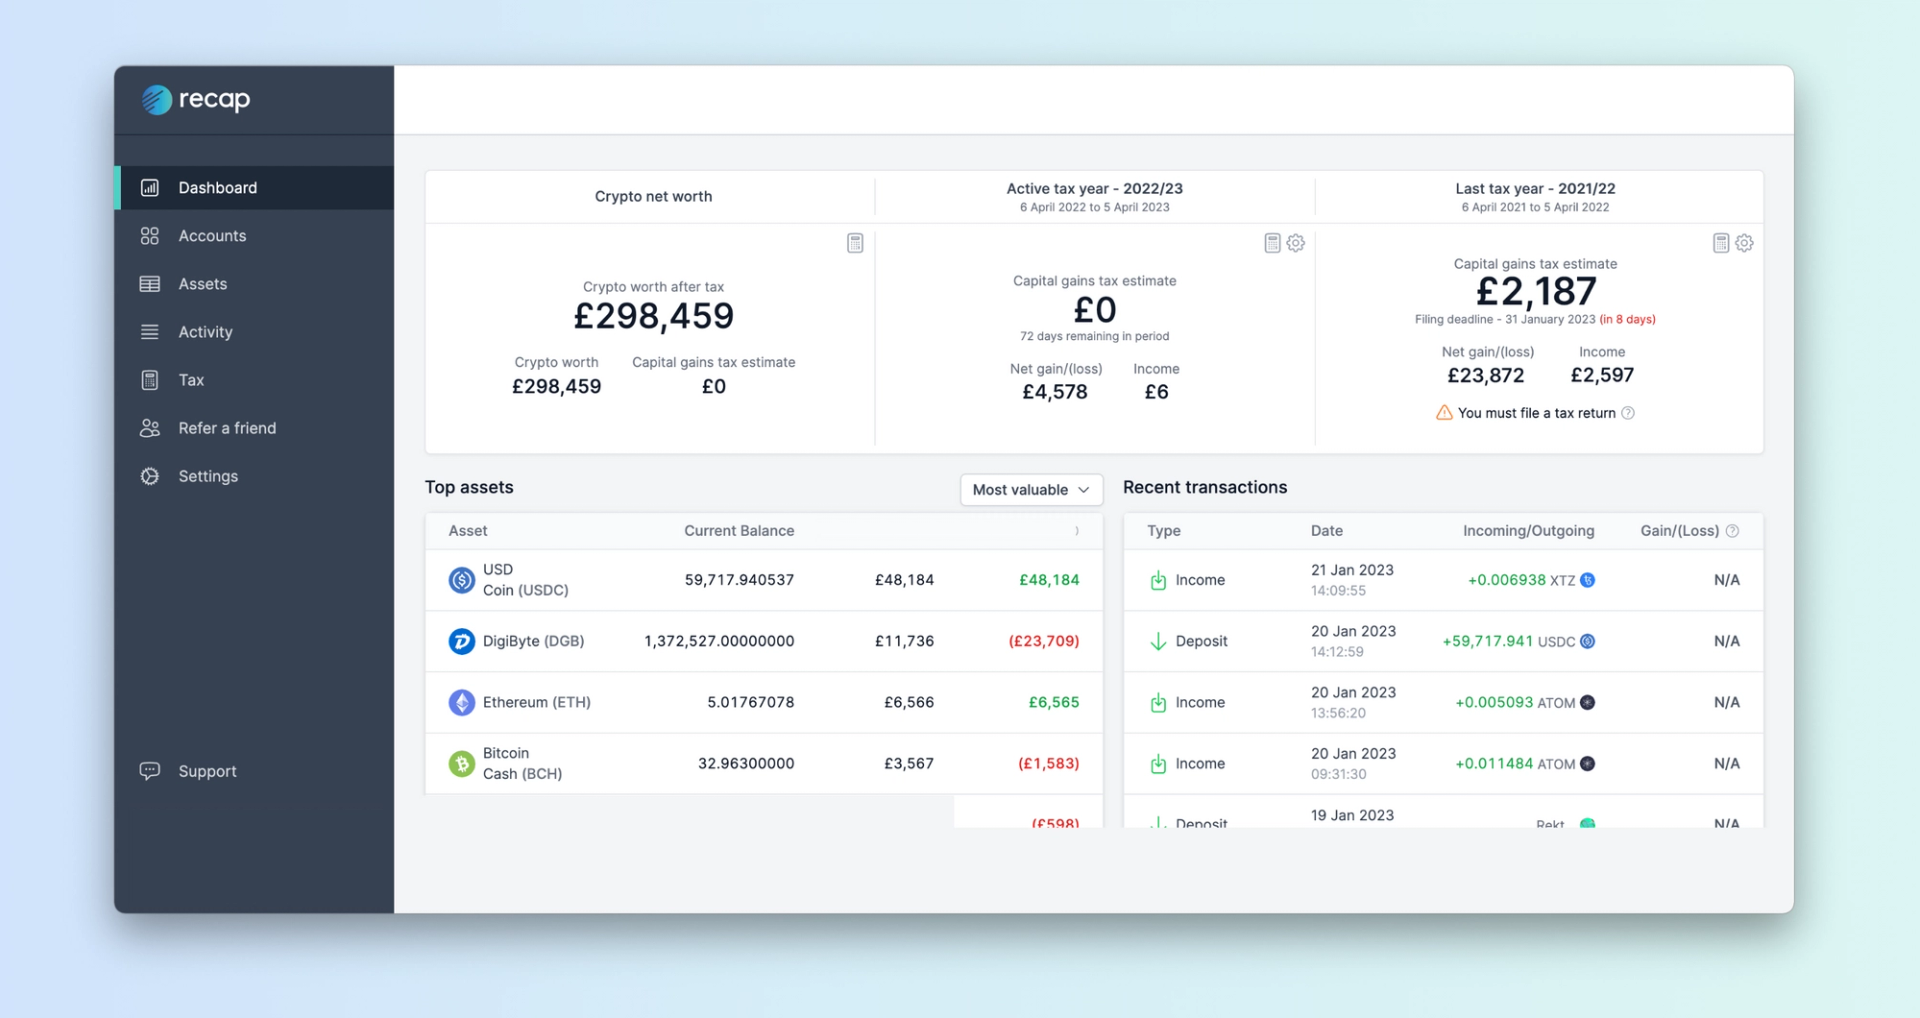 A screenshot of Recap's UK Dashboard. The screen shows crypto net worth, capital gains tax estimates for the active and previous tax year, the top 5 most valuable assets and 5 recent transactions.